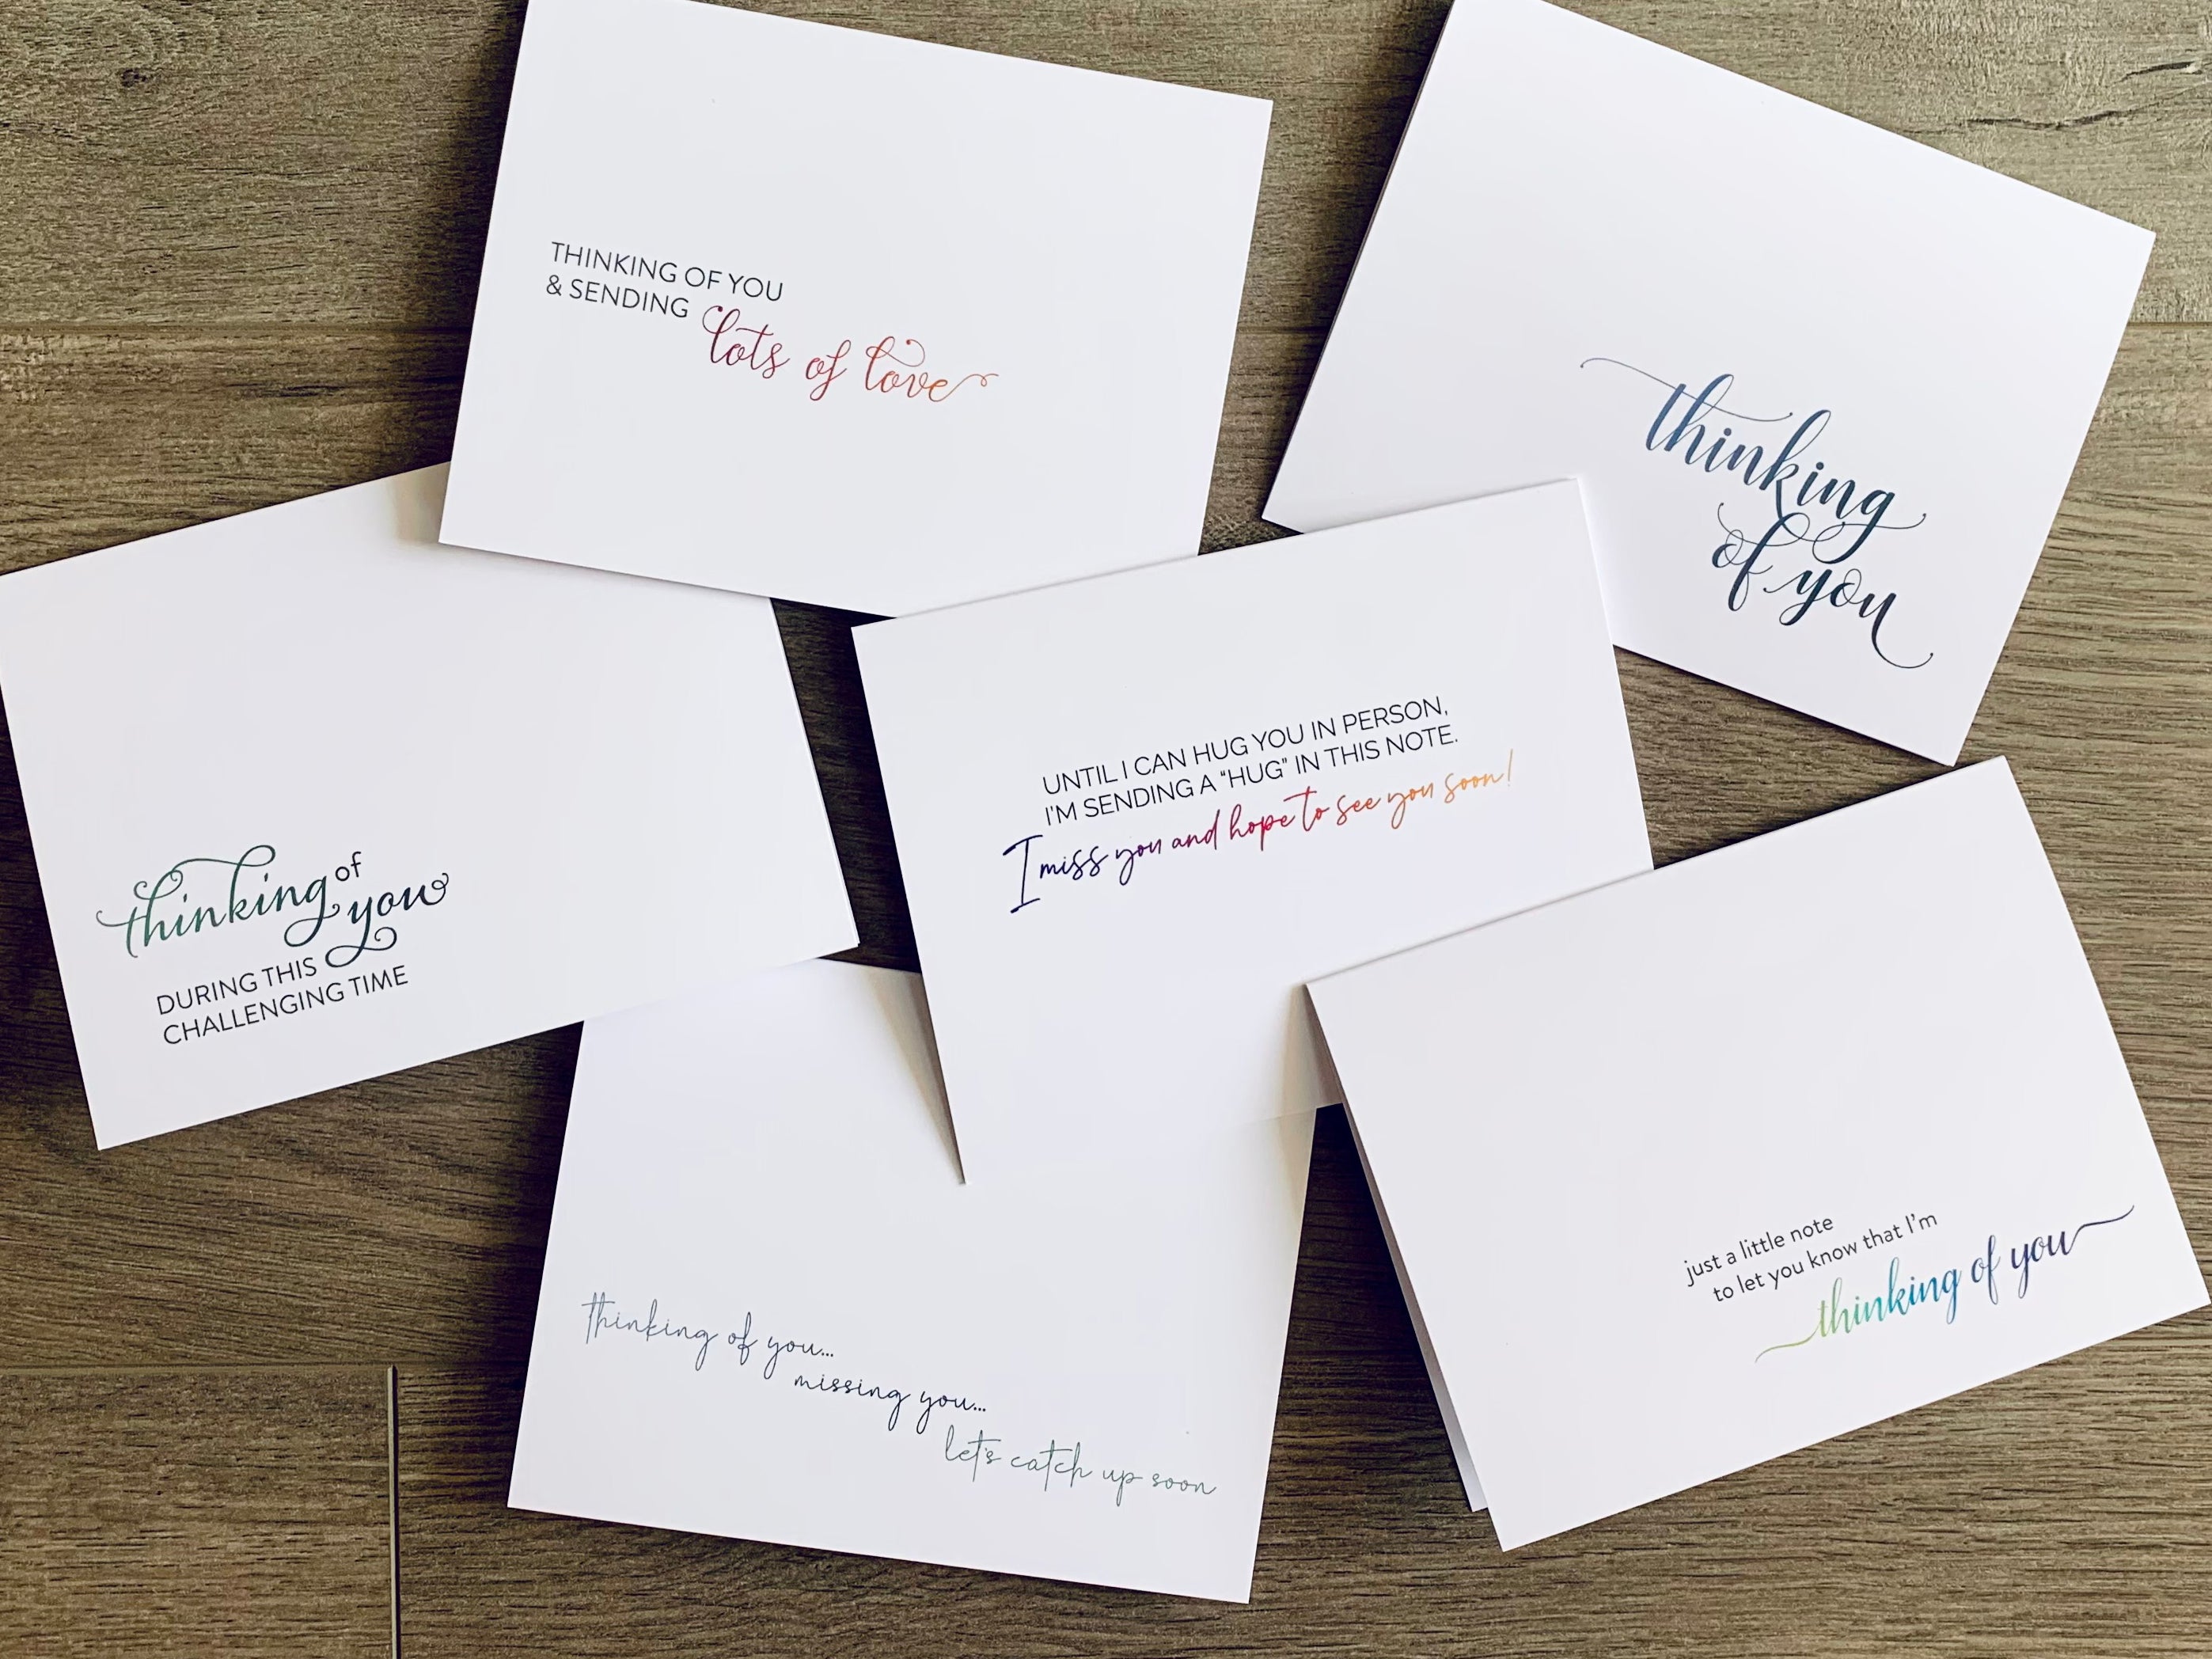 Six white notecards are overlapped and arranged on a wooden background. Each card has a mix of sans serif and script fonts with a thinking of you style sentiment. Thinking of You collection by Stationare.